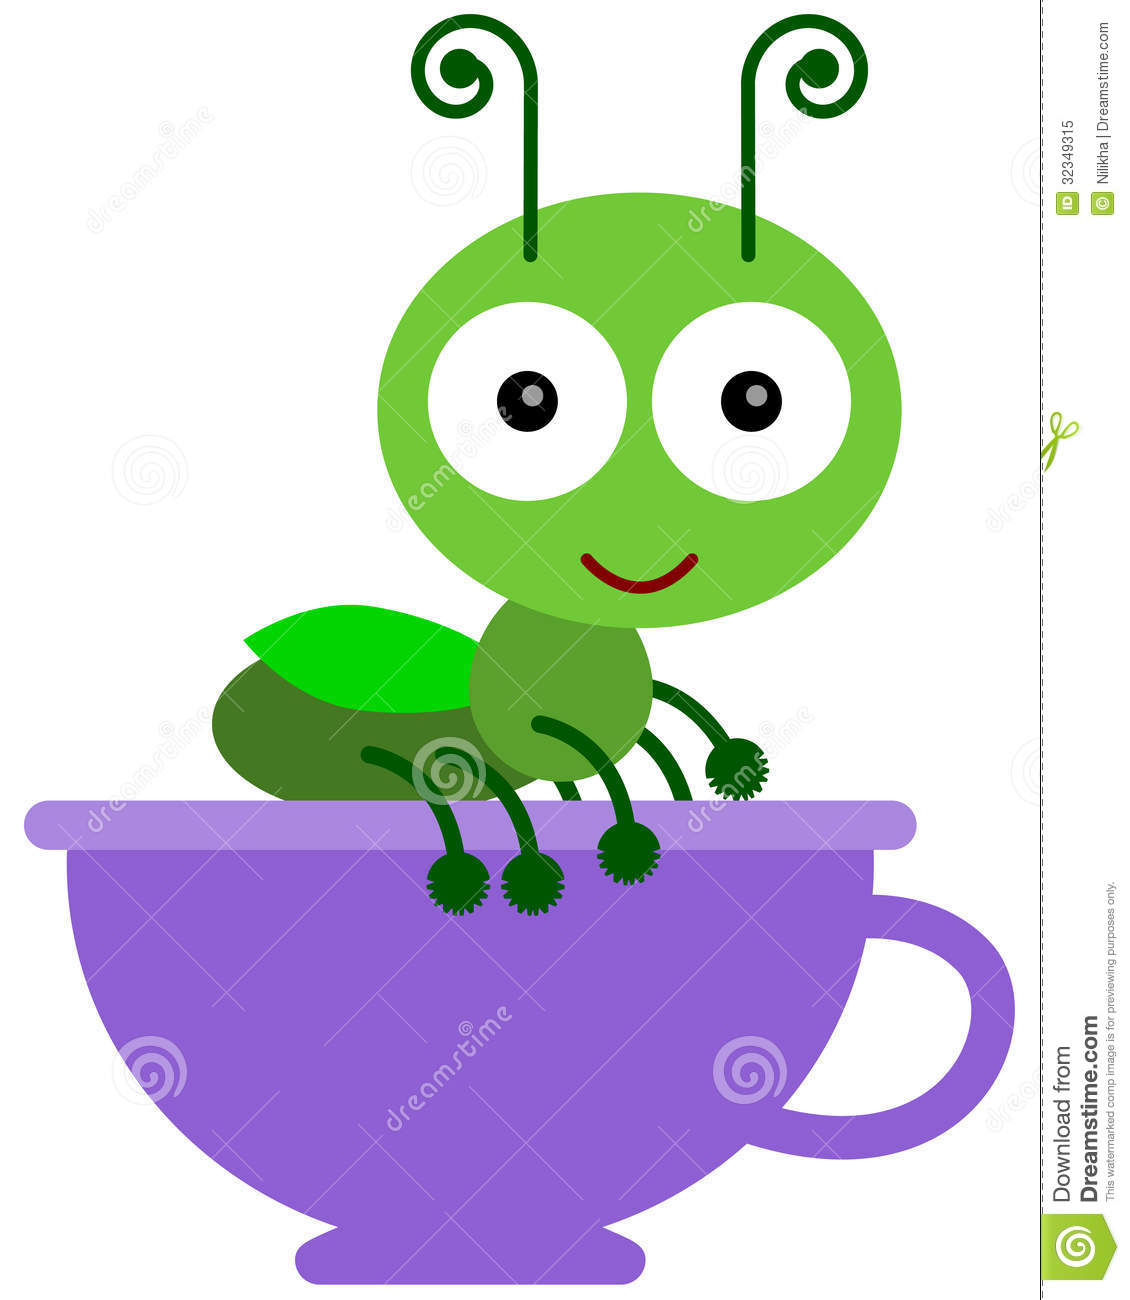 Cricket On A Cup Royalty Free Stock Photo   Image  32349315